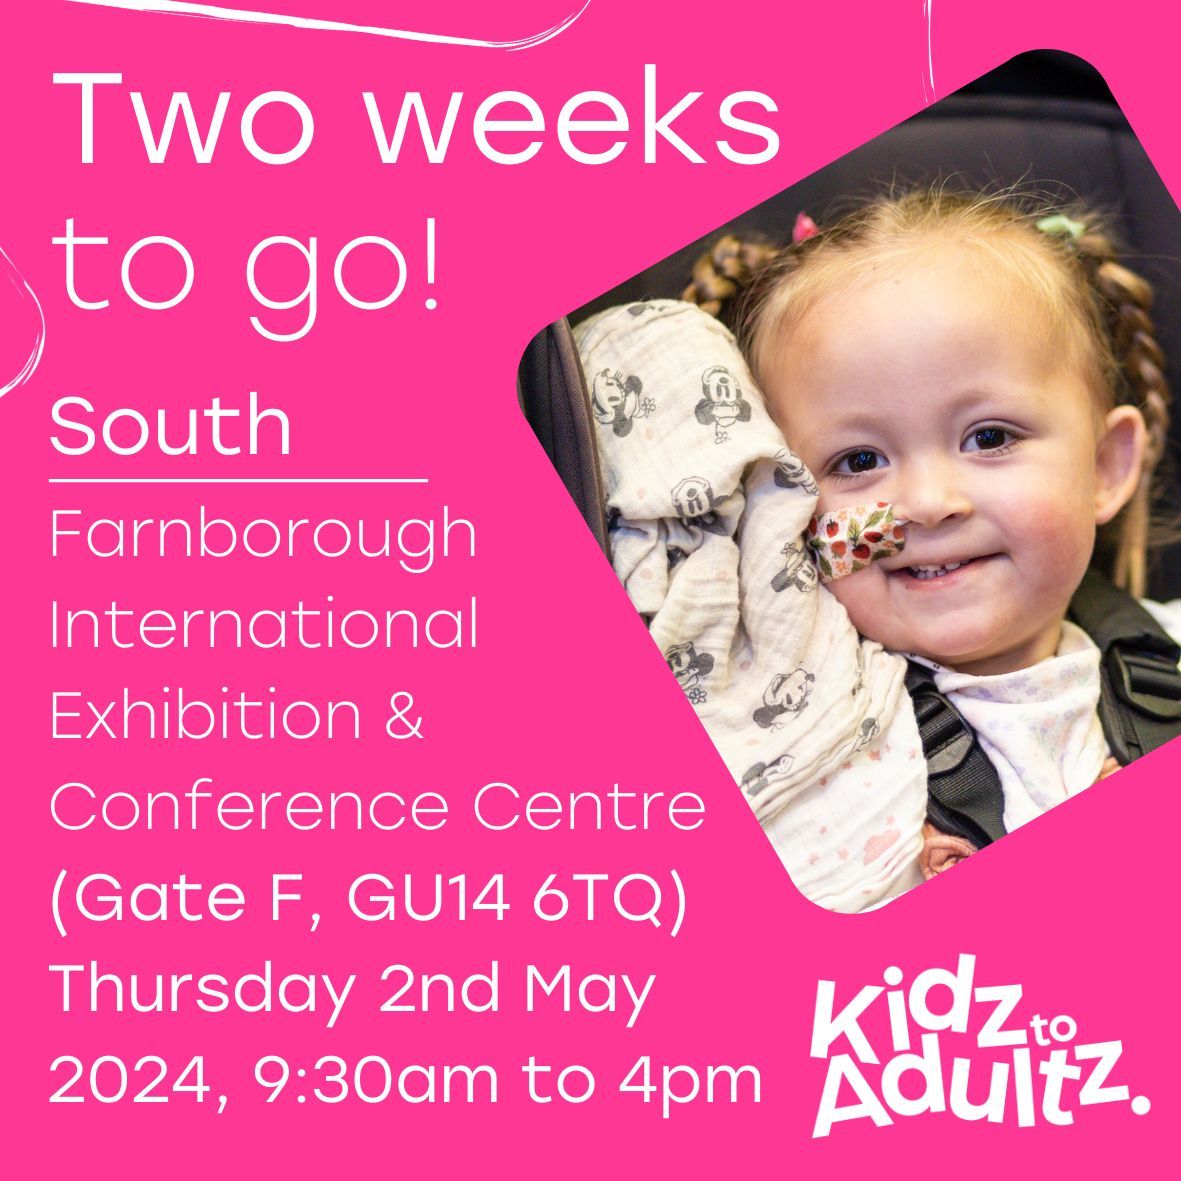 Just two weeks to go until @kidztoadultz exhibitions South. Get ready for a packed day of seminars, exhibitors, fun features and more

#kidztoadultz #disability #exhibition #KidzToAdultz #KidzToAdultzSouth #DisabilityAwareness #DisabilityInclusion #DisabilitySupport